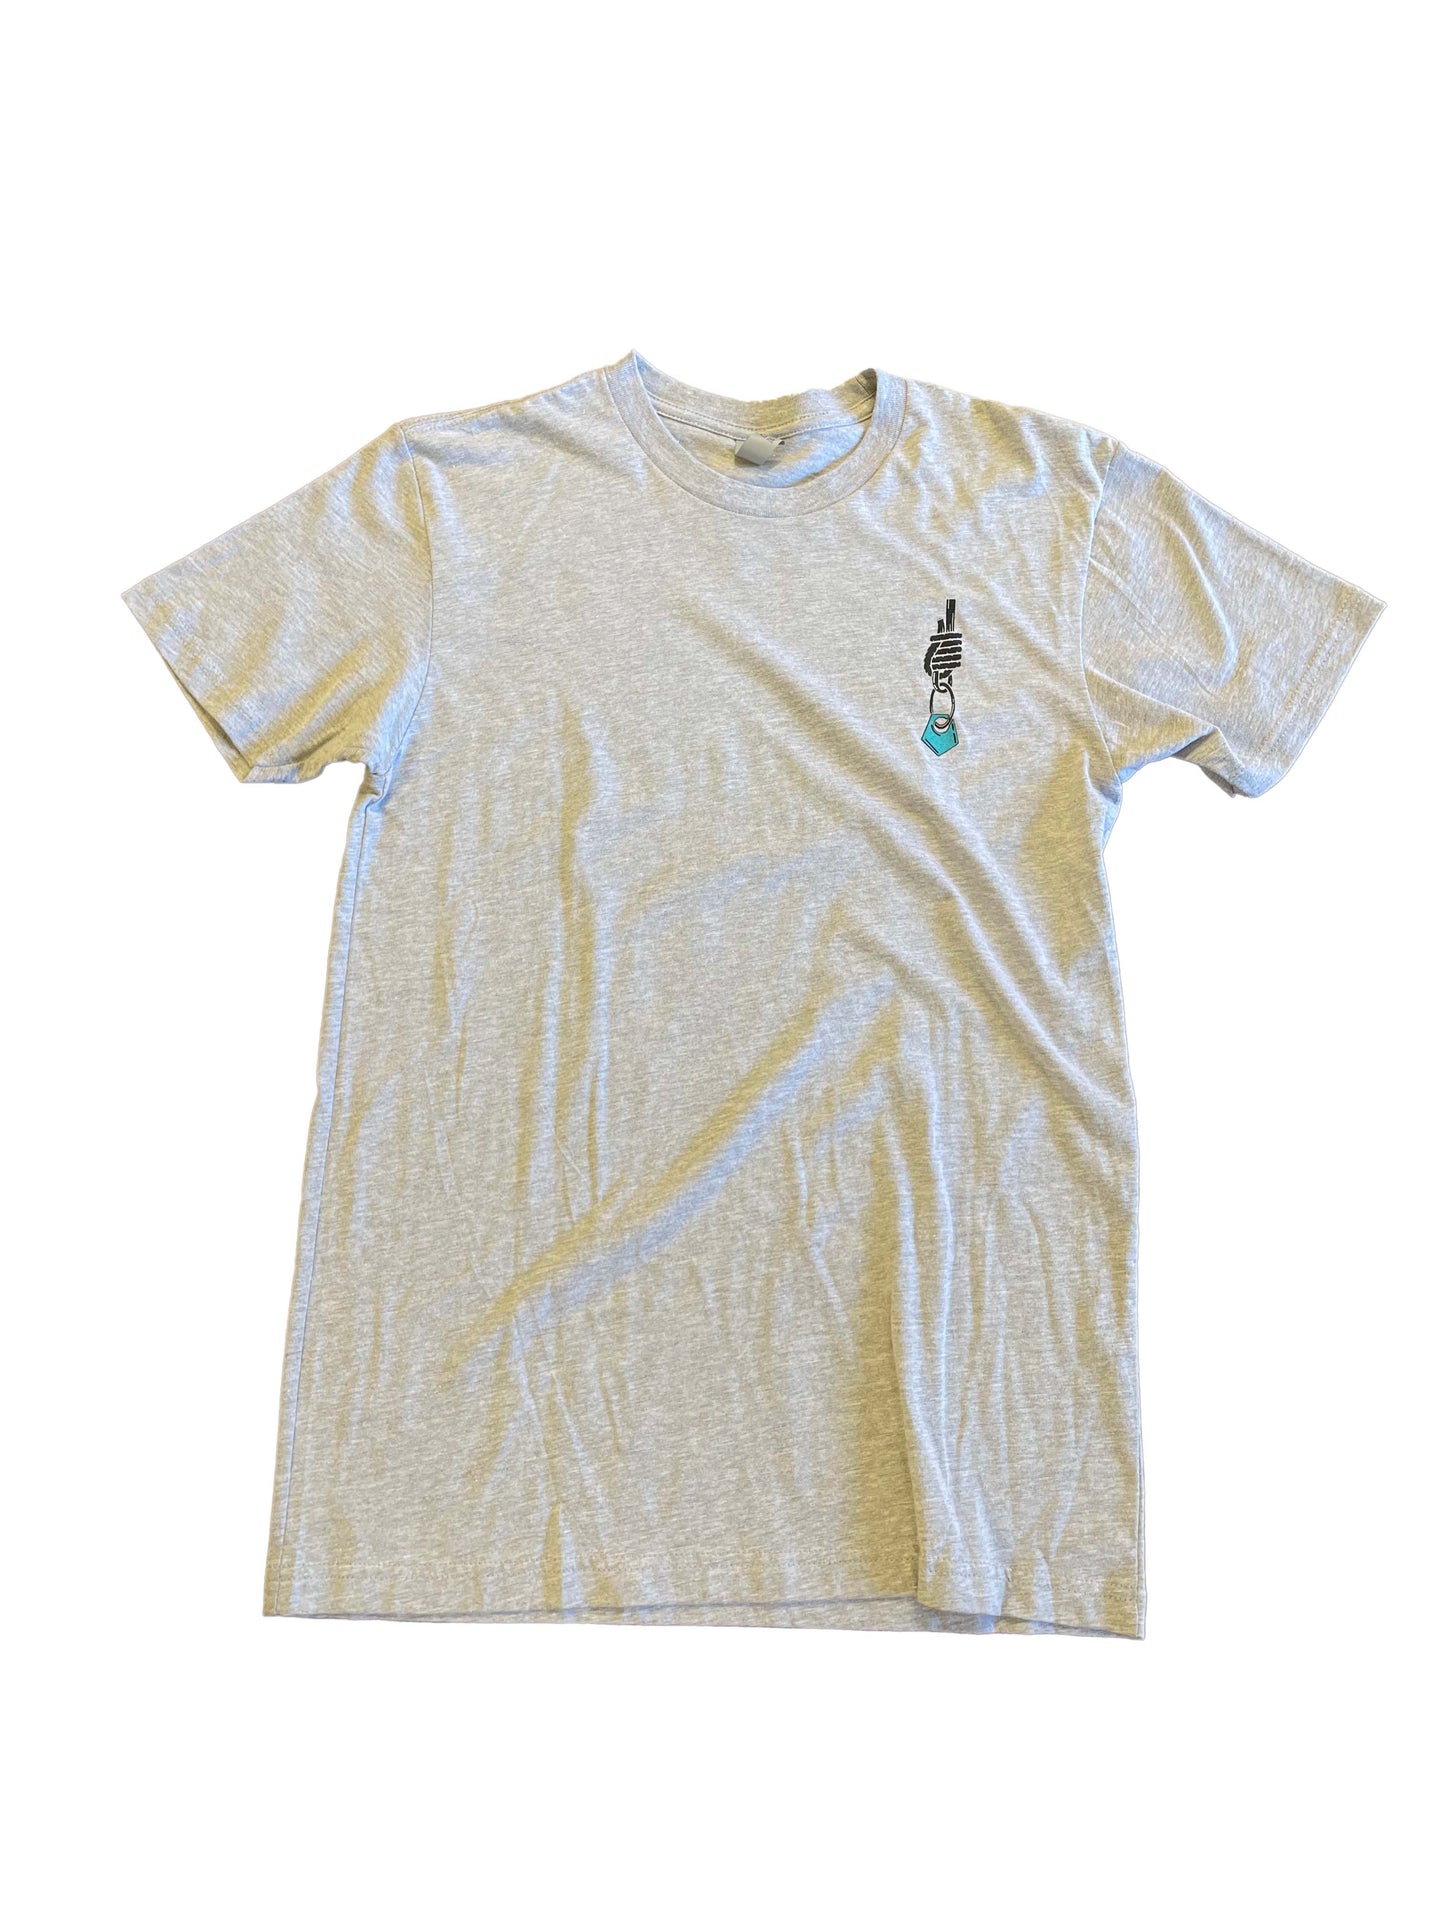 SMALL BOAT CLUB KNOT TEE